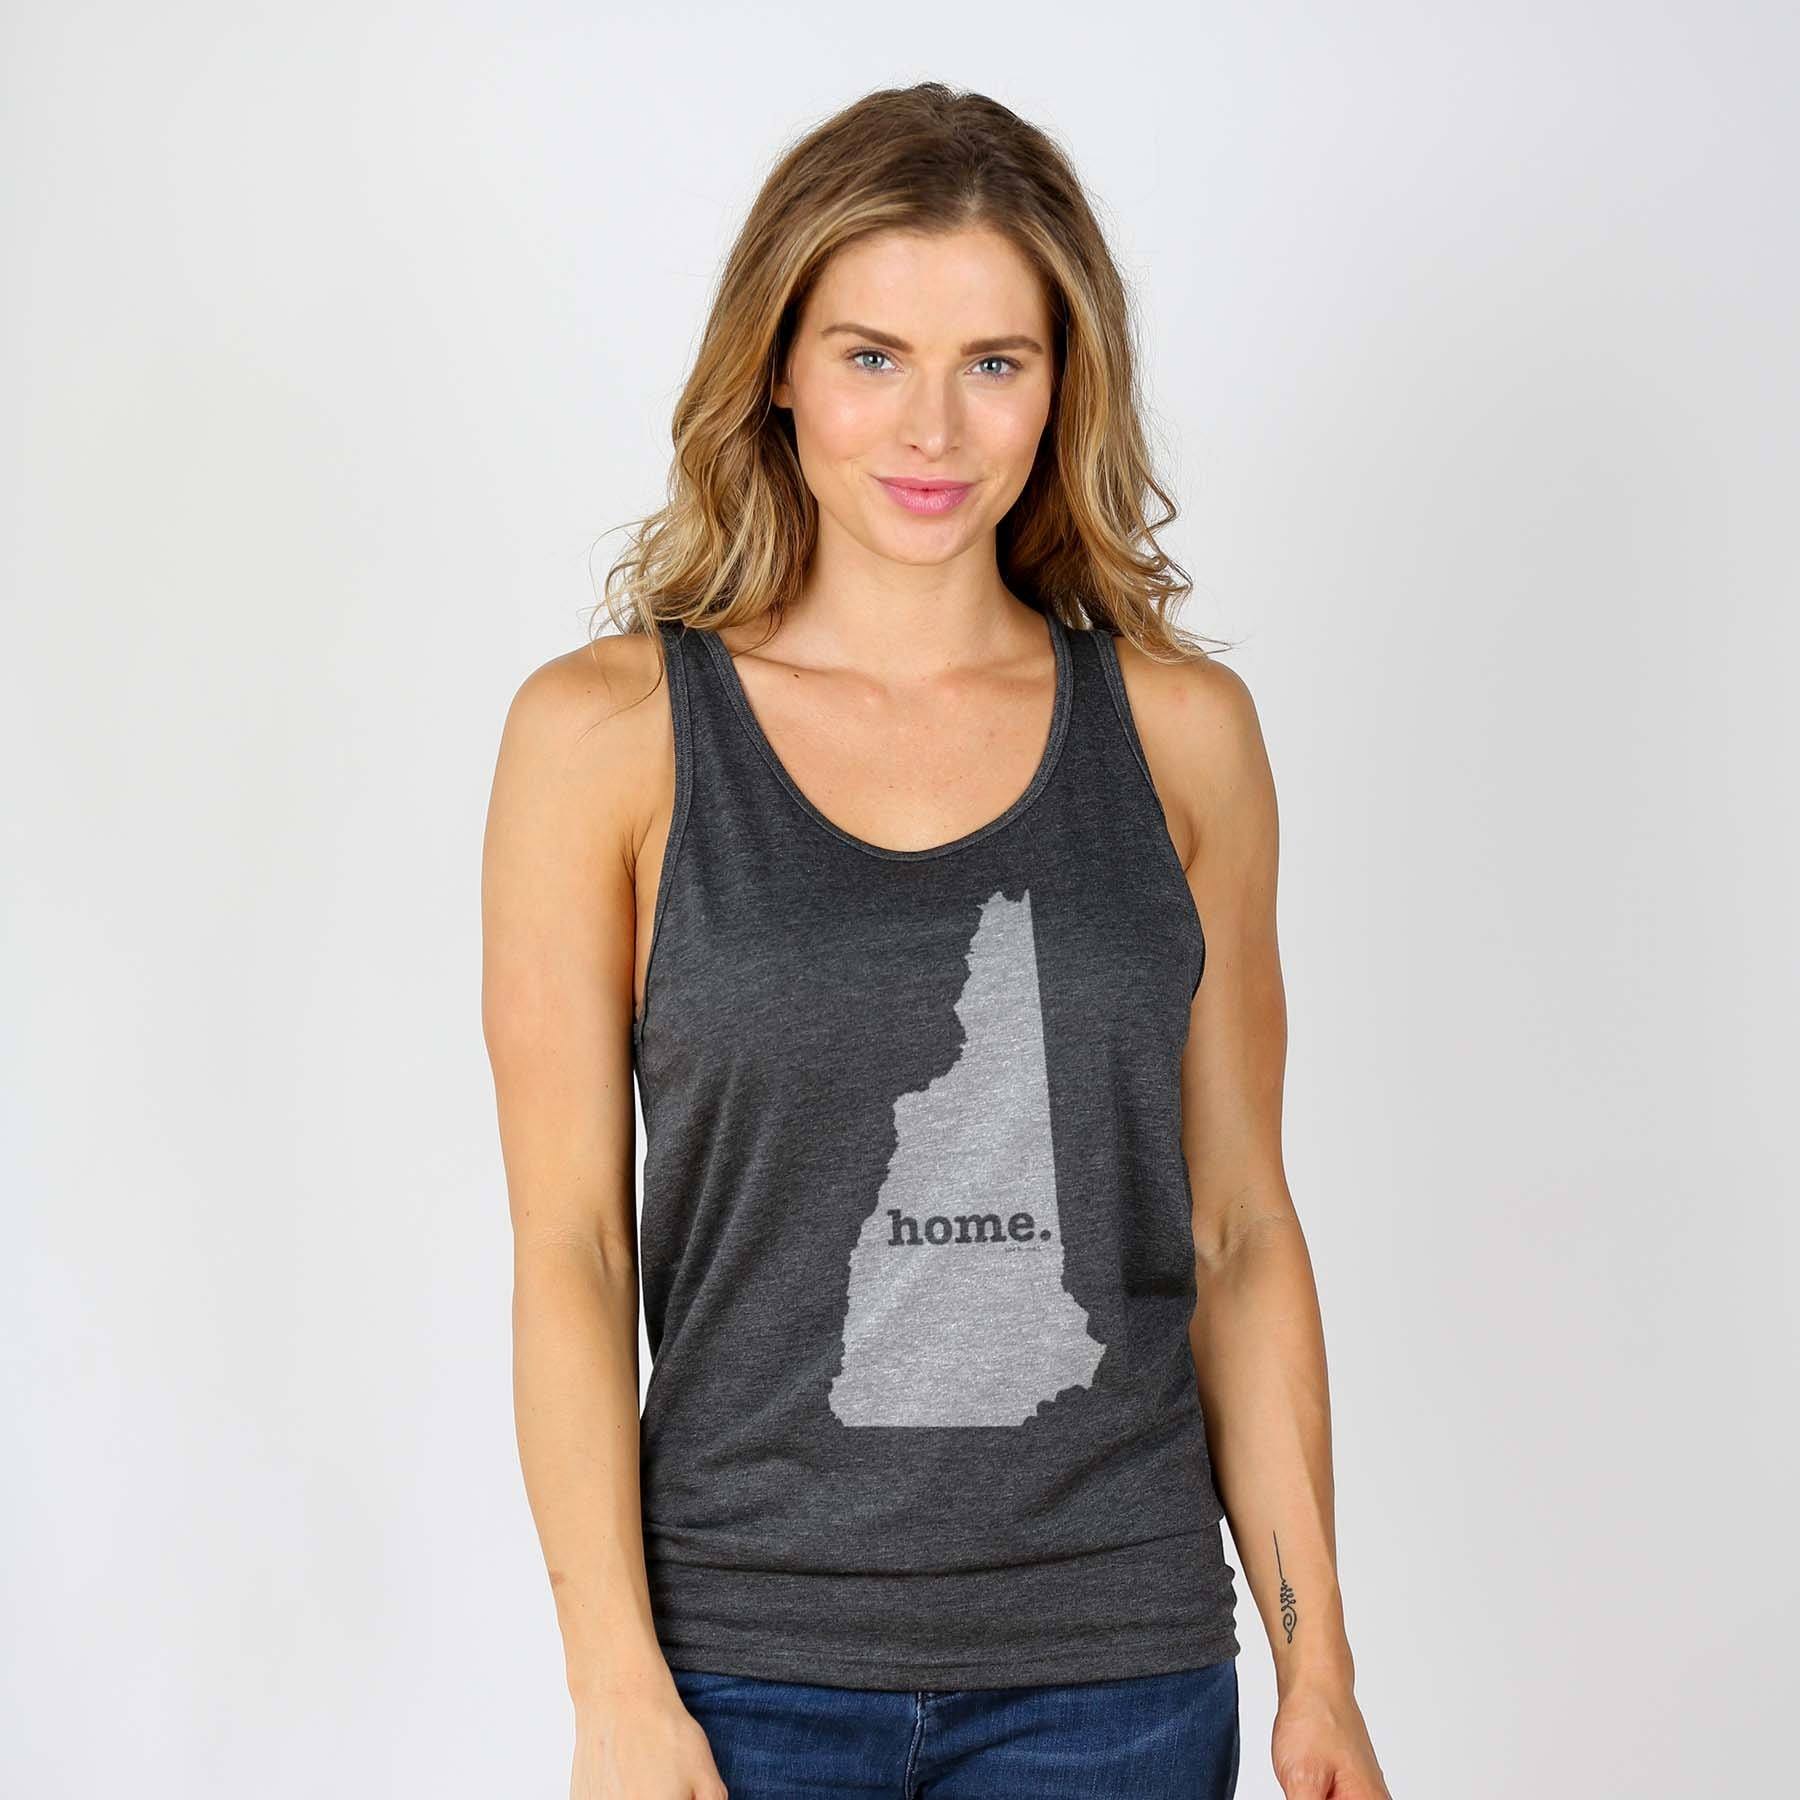 New Hampshire Home Tank Top